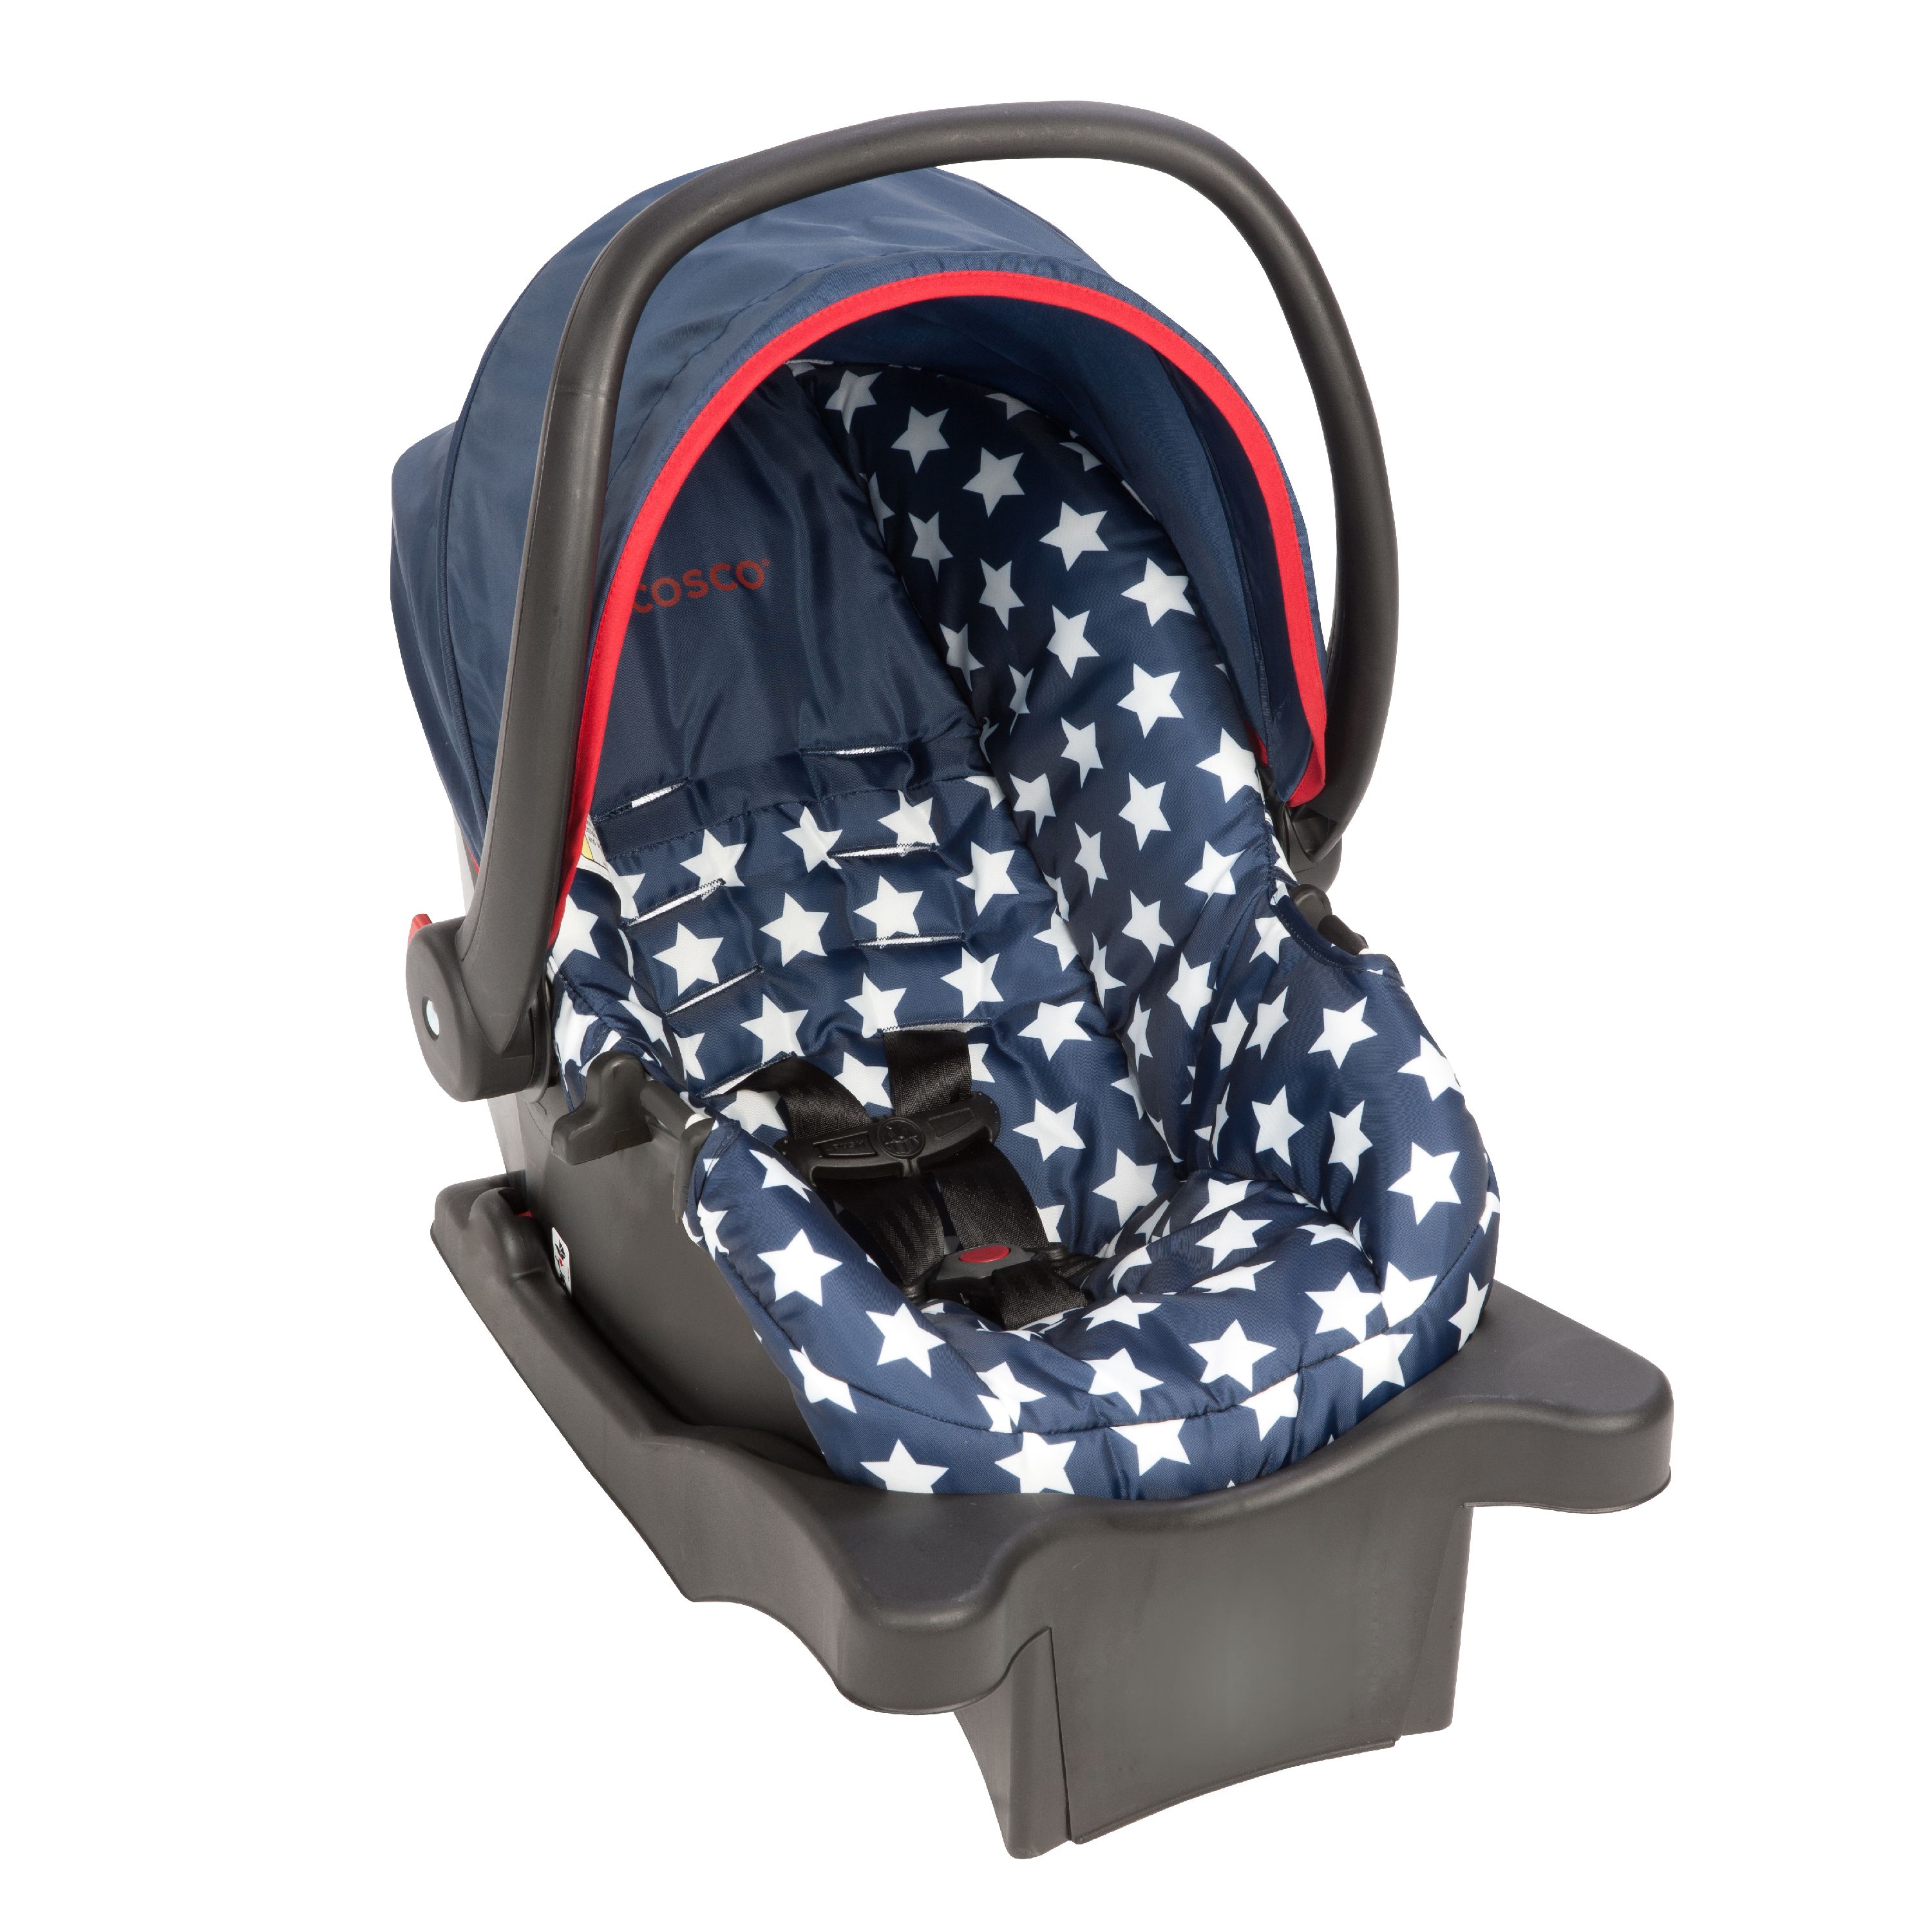 Cosco Commuter Compact Travel System - image 3 of 6